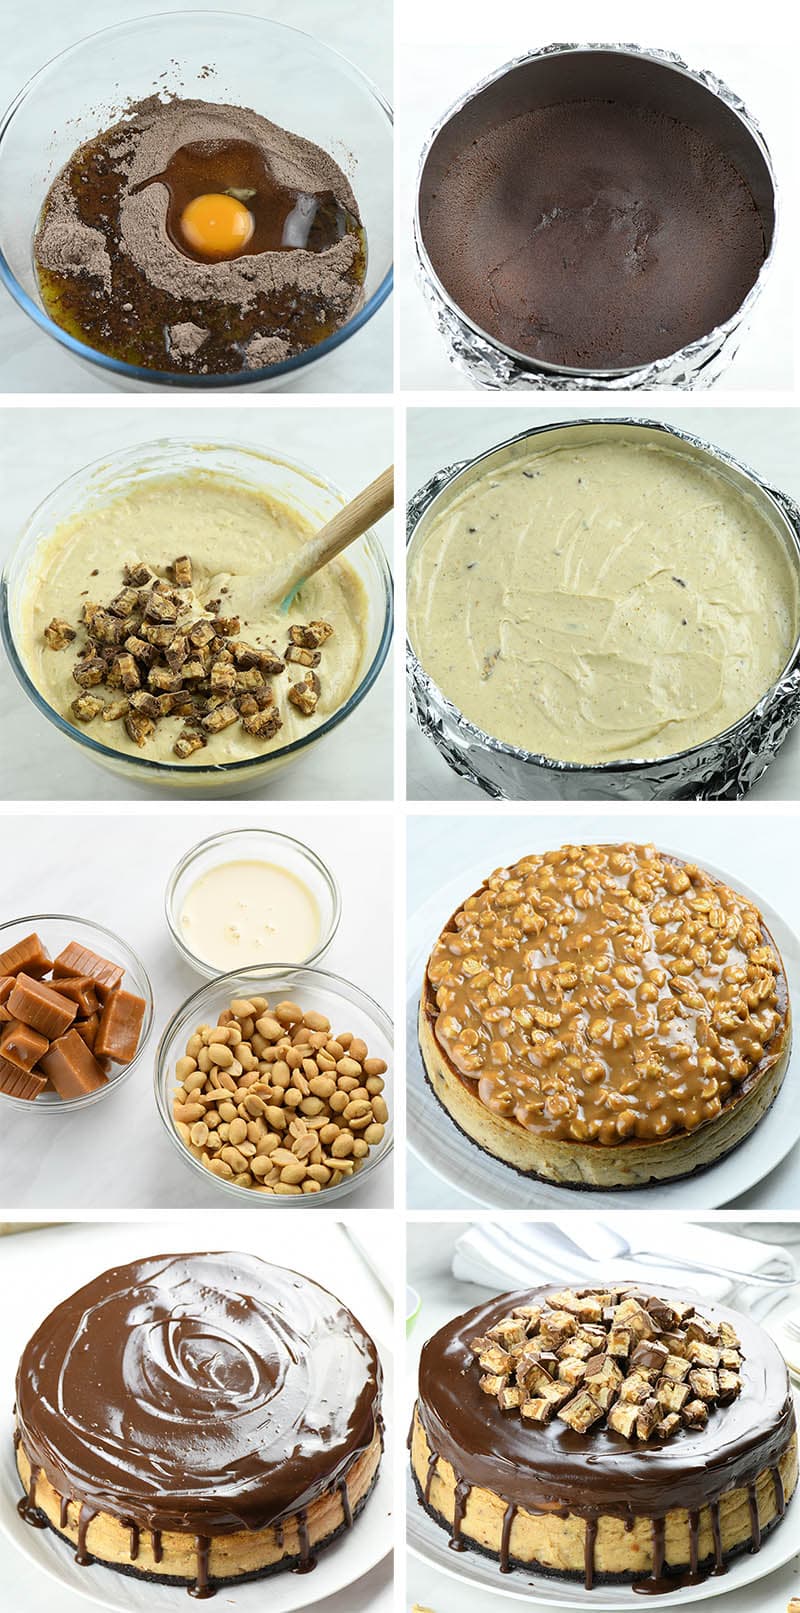 Eight images of Peanut Butter Snickers Cheesecake step-by-step instructions.